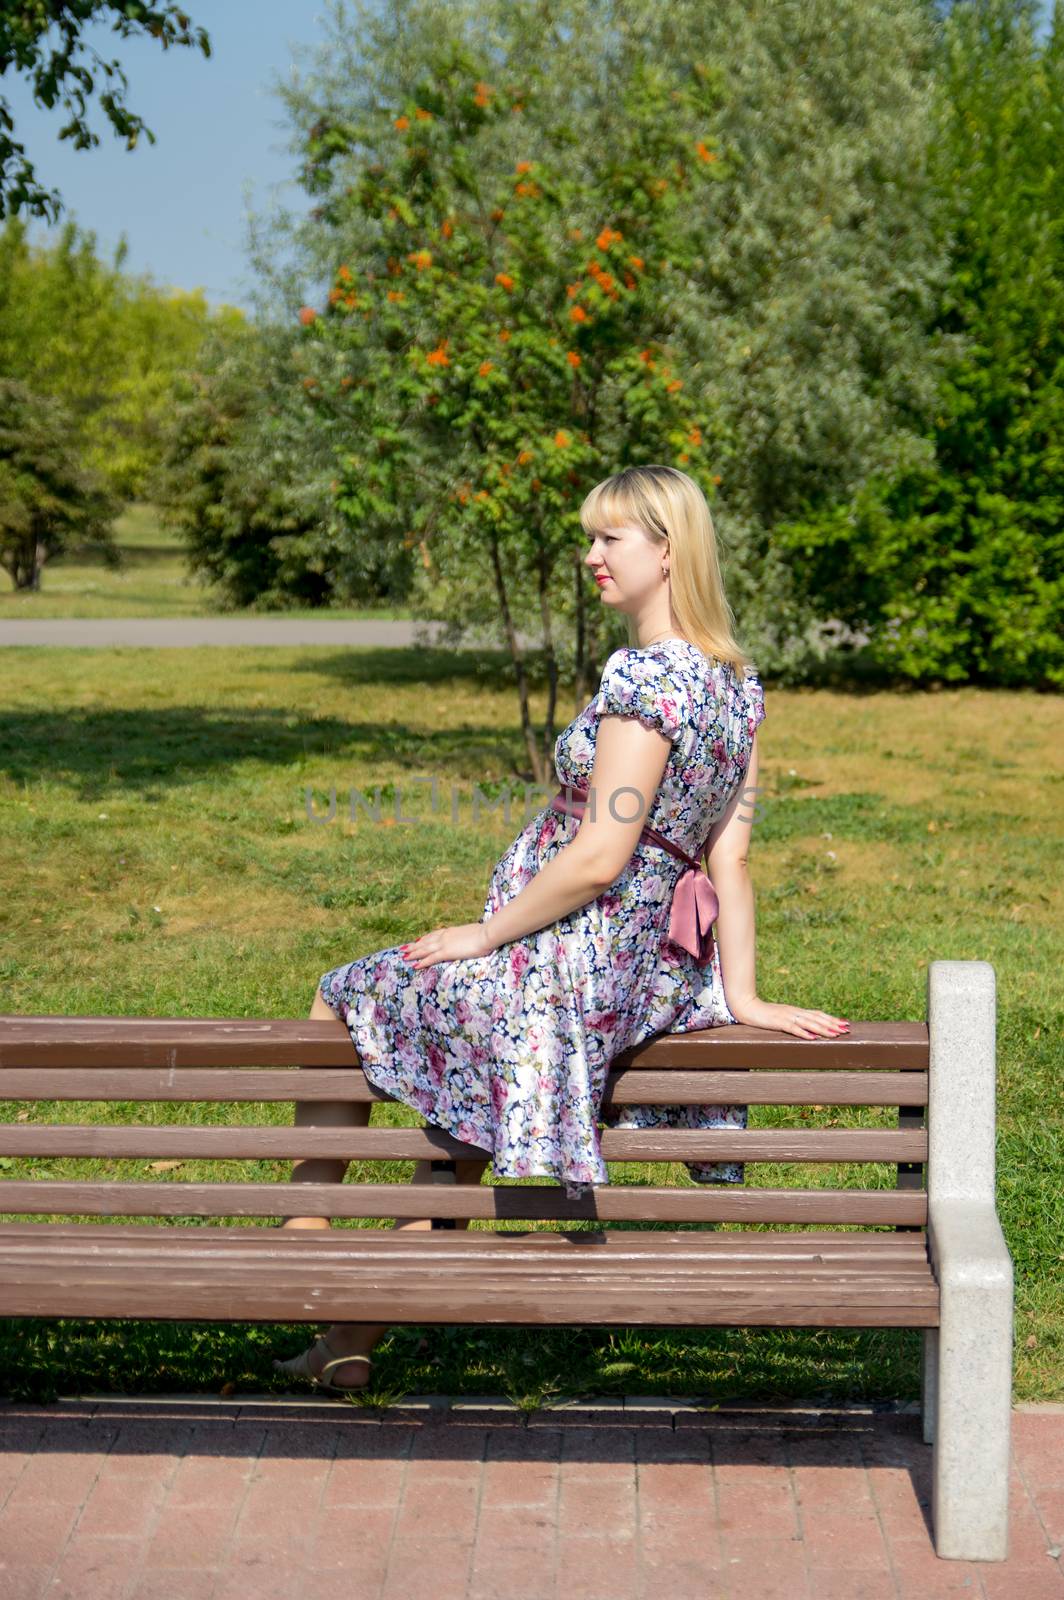 Pregnant woman sitting on wooden bench in park